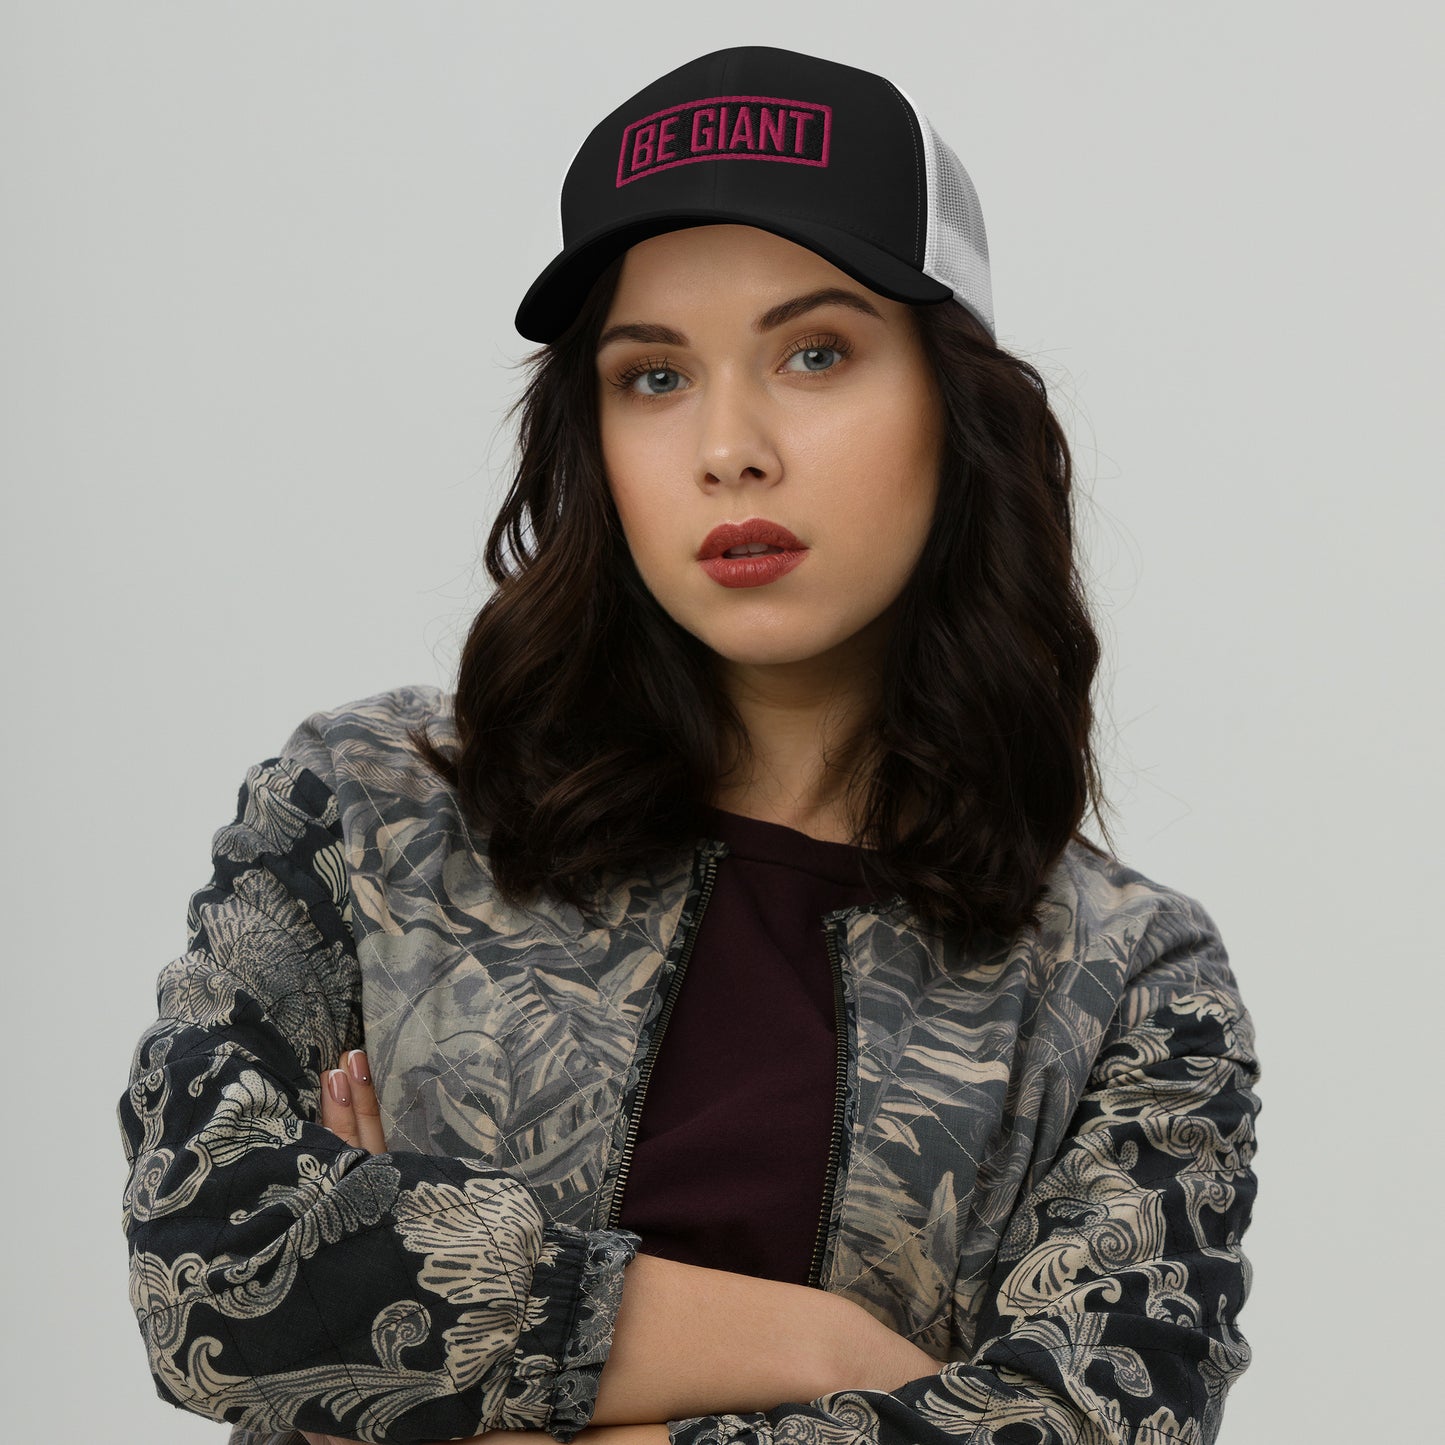 BE GIANT Black and Pink Lettering Trucker Cap